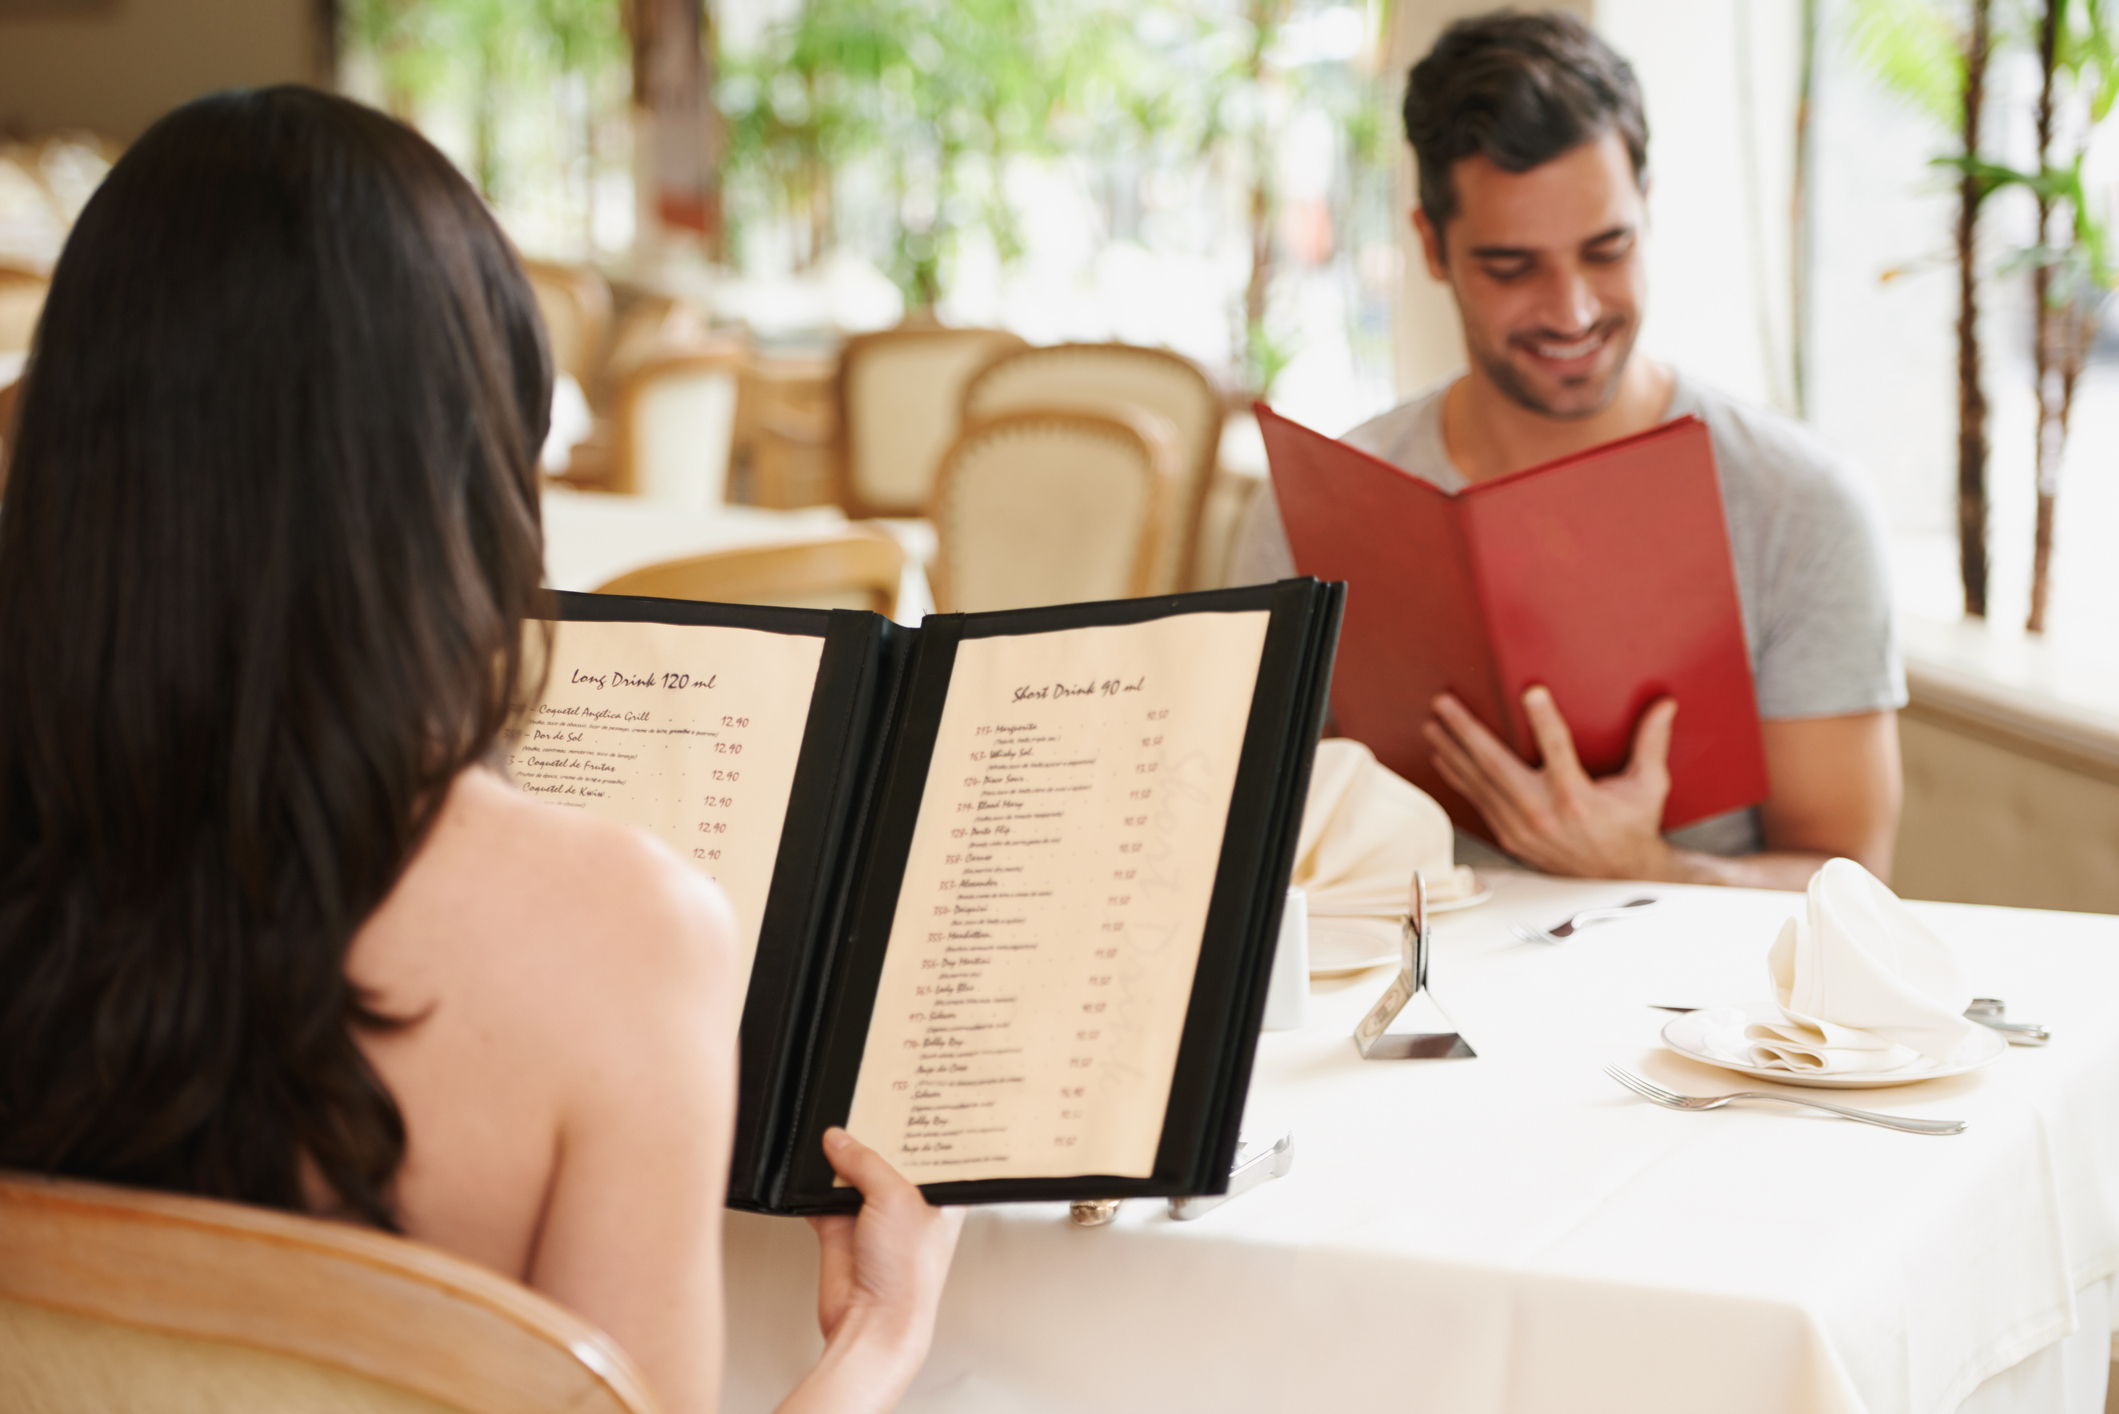 Two people sitting at a table in a restaurant reading menus; one has long dark hair and the other has short dark hair and a beard